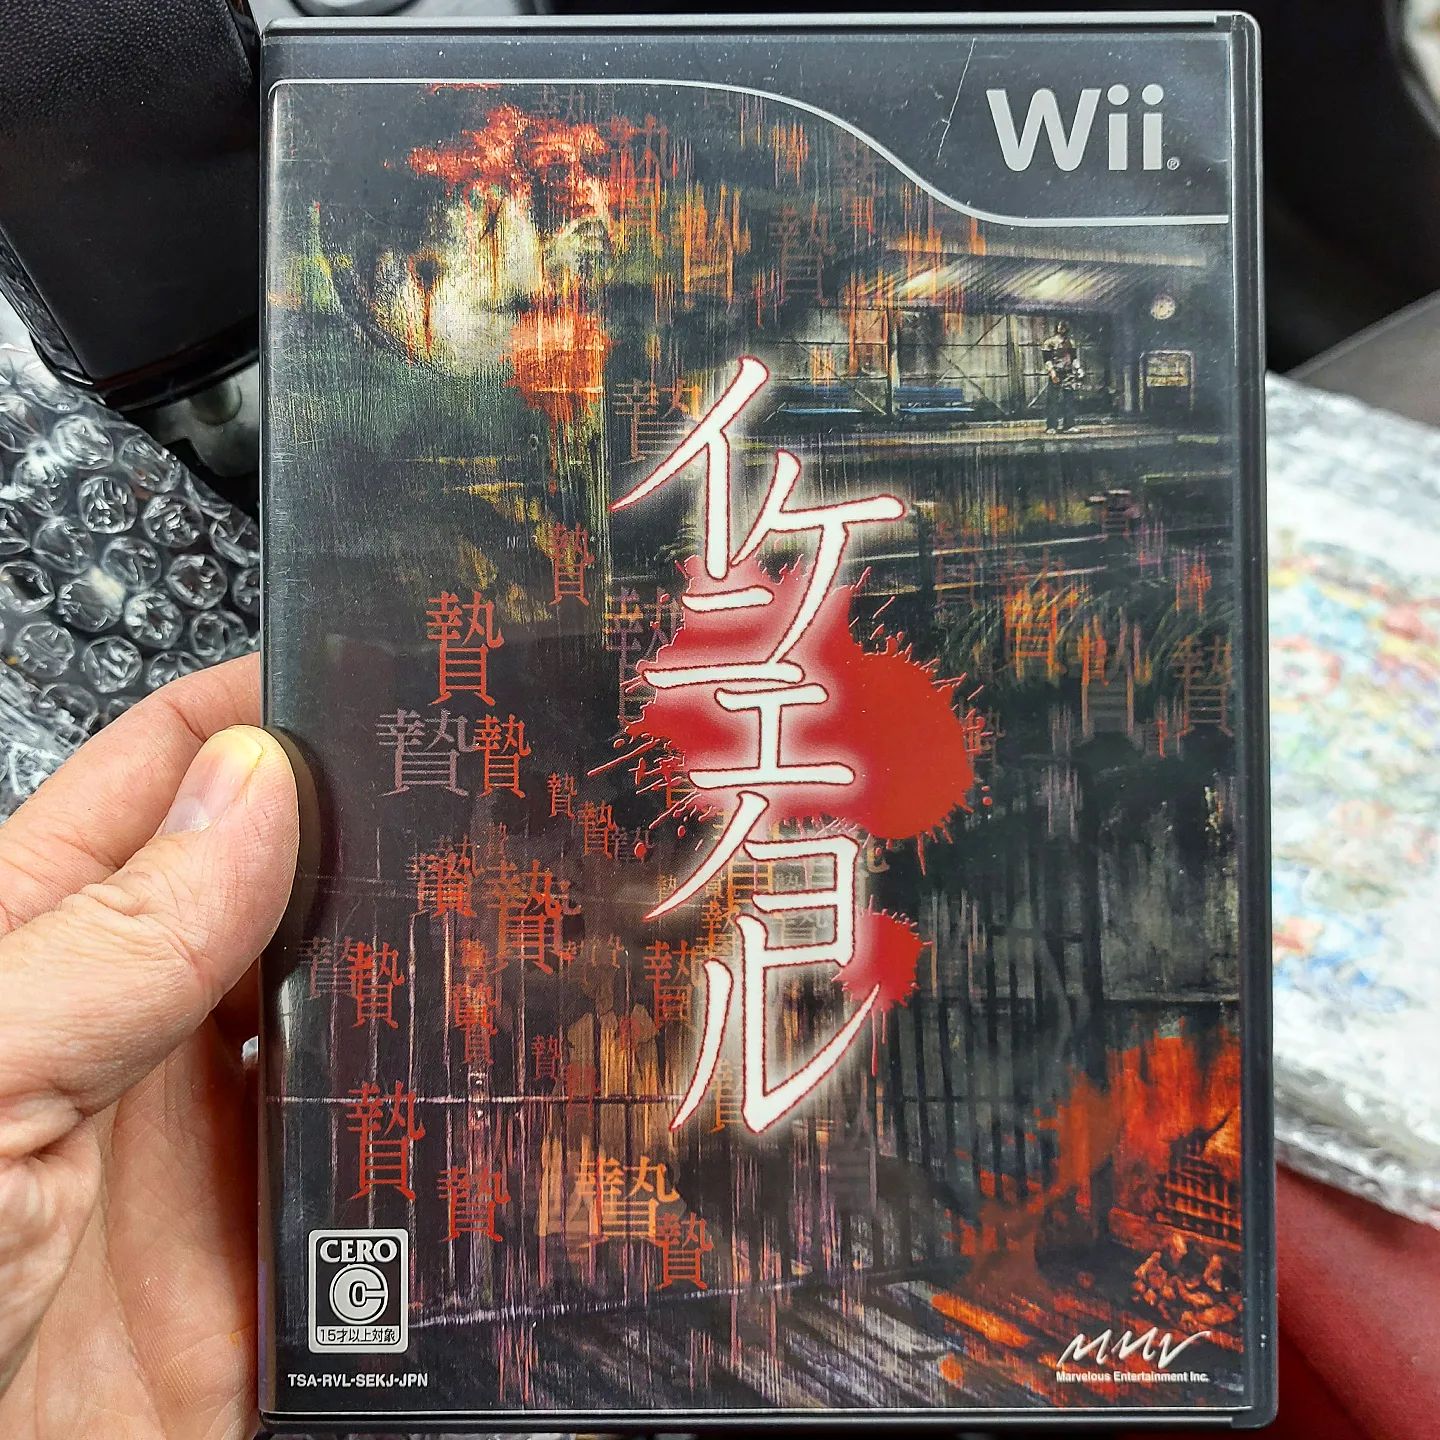 Ikenie no Yoru! A rare, unknown Wii Horror game, which has gotten a English fan translation patch! Yata!

Can't wait to play this. I'm currently lining up some obscure horror games to play in October! I'm hoping to do this also via Twitch, but things are still a bit hectic at home.

#retrogamepapa #gaming #gamecollector #gamecollecting #retrogames #retrogamecollector #wii #horrorgames #horrorgame #videogame #ikenienoyoru #wiihorror #marvelousentertainment #nintendo #japanesegames #japaneseimport